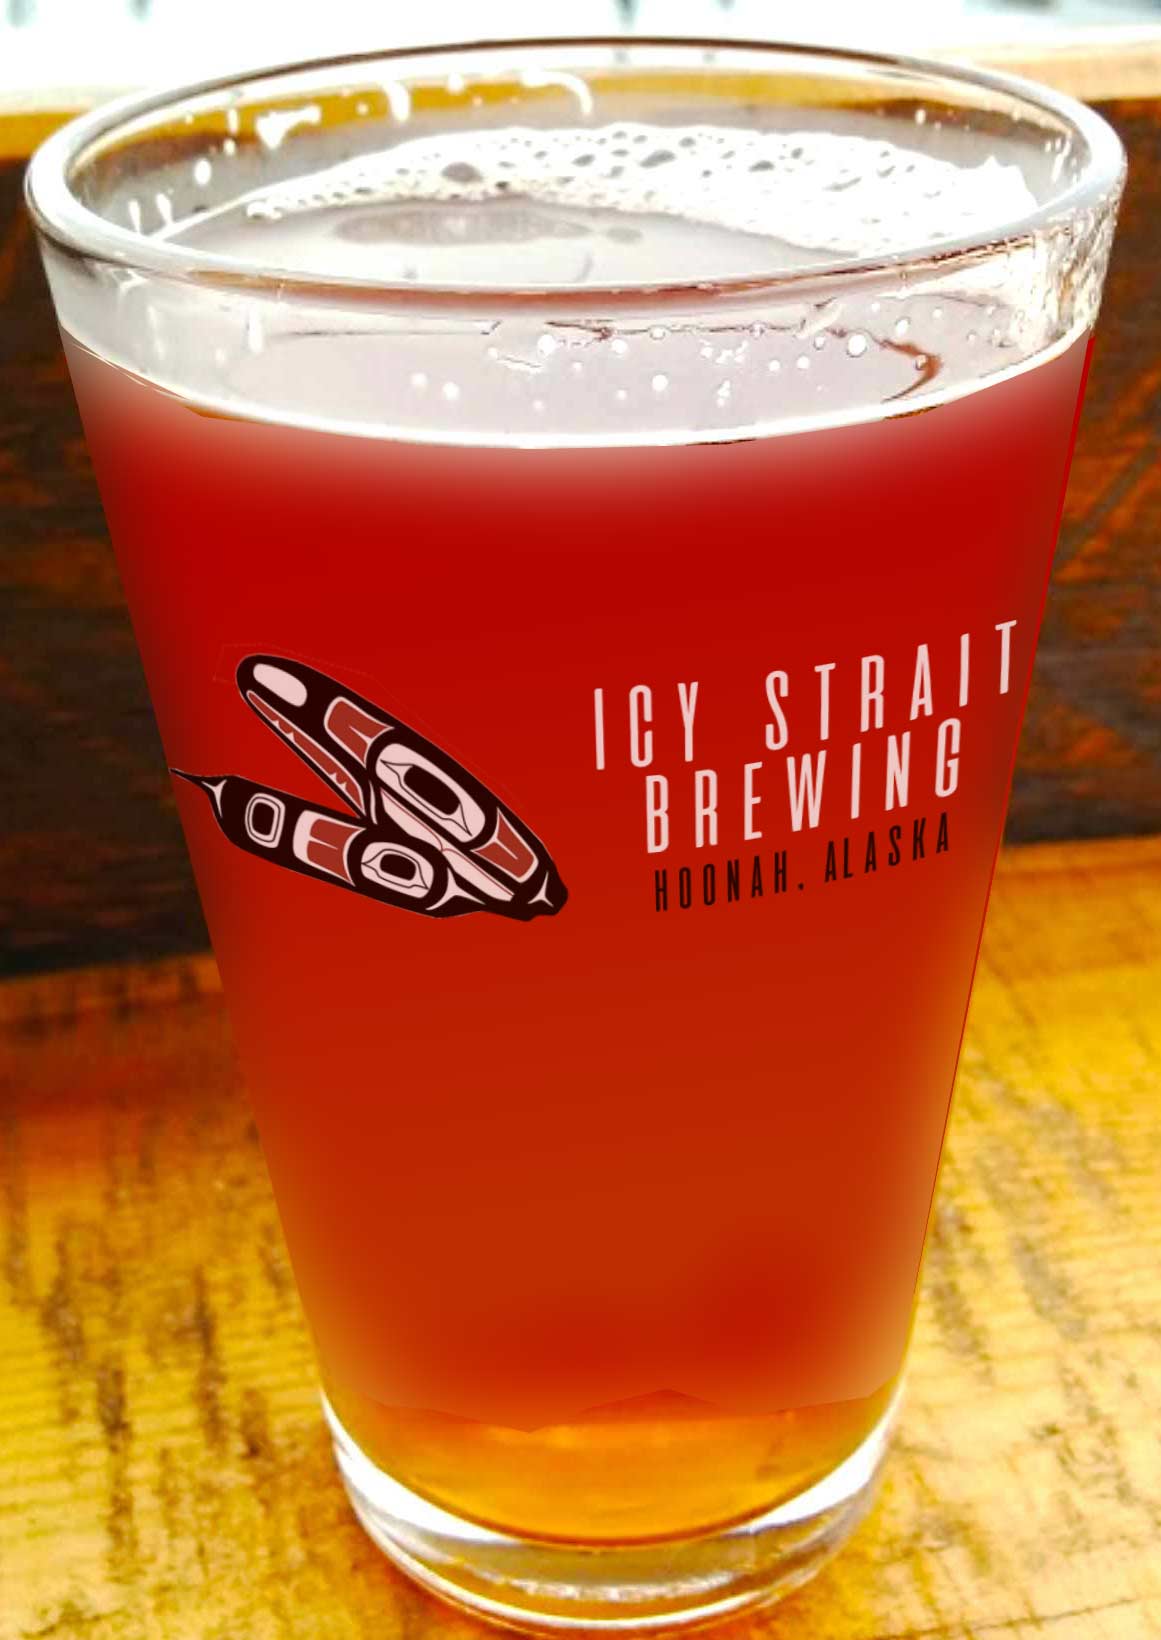 Icy Strait Brewery